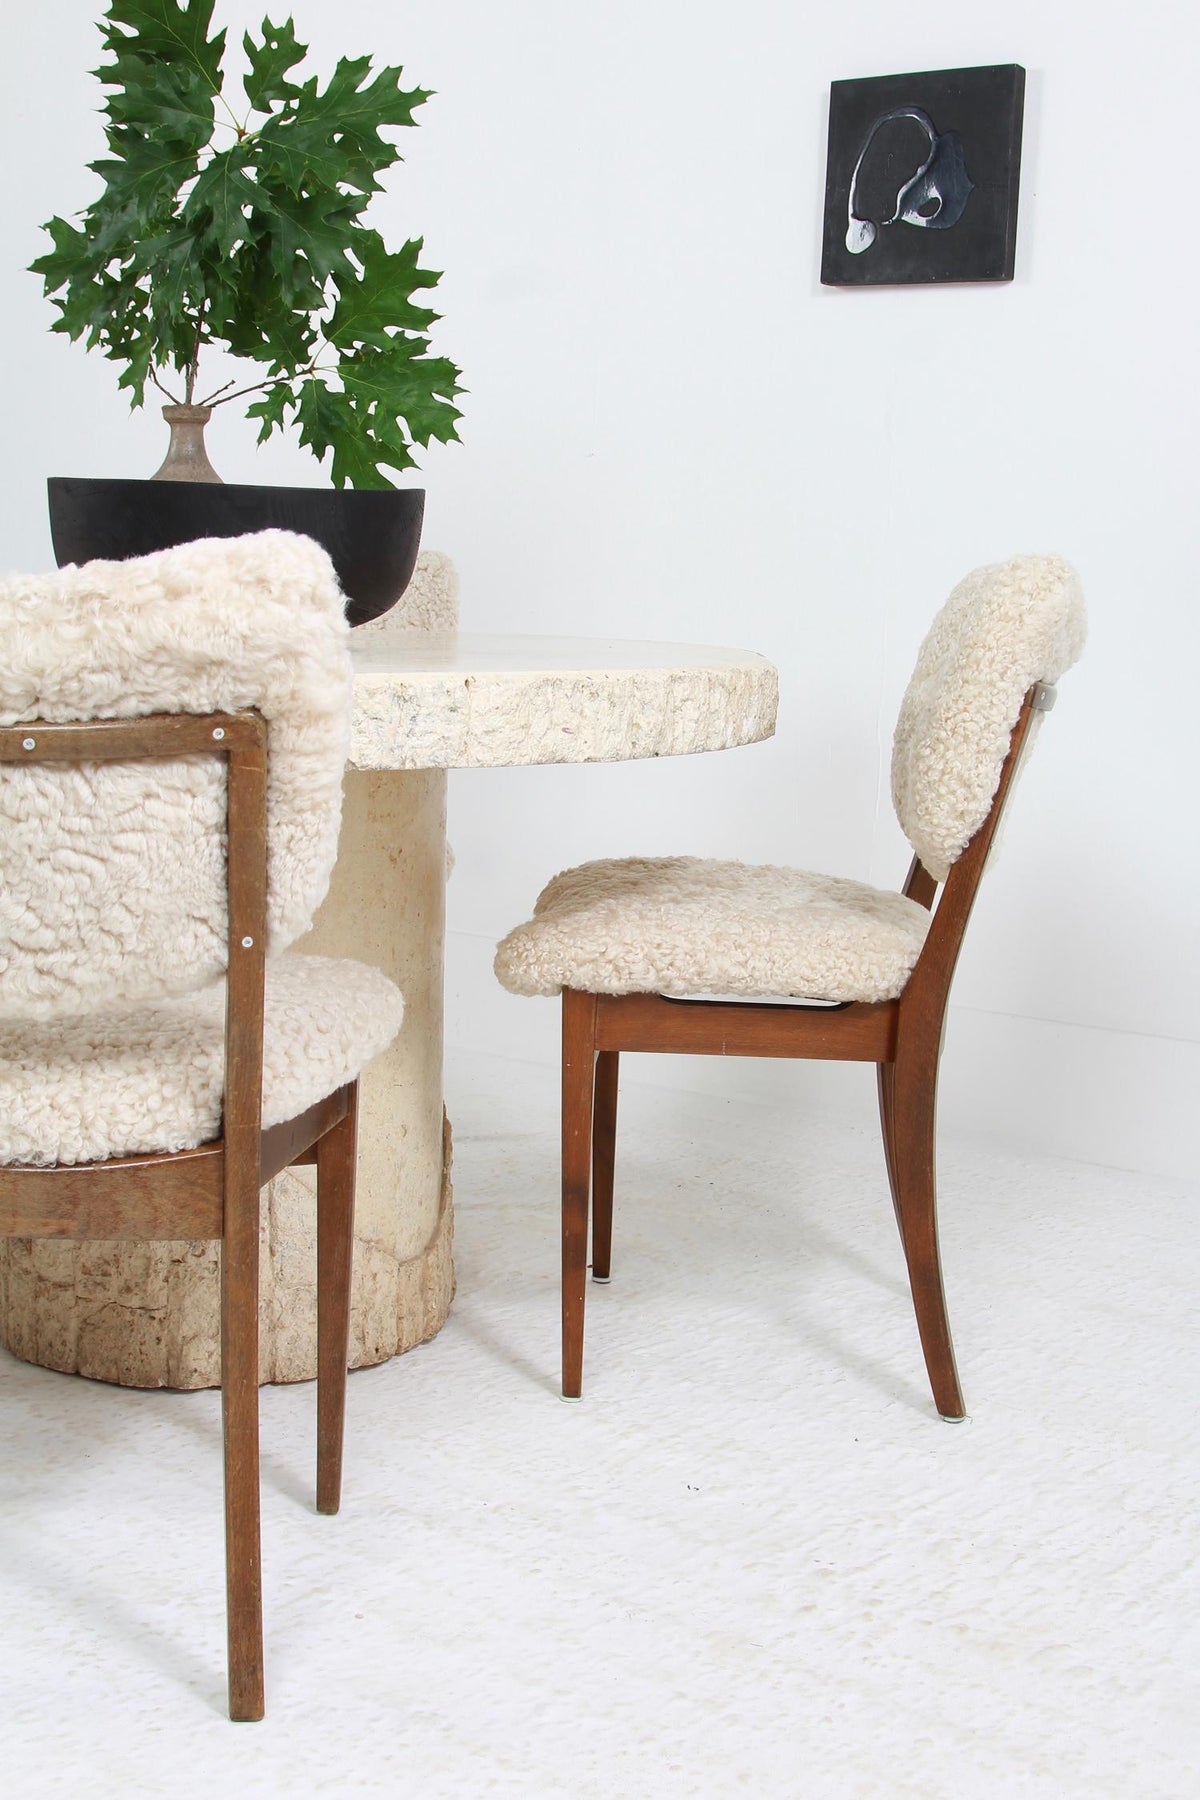 SET OF FOUR  DANISH MID CENTURY MODERN DINING CHAIRS UPHOLSTERED NATURAL SHEEPSKIN